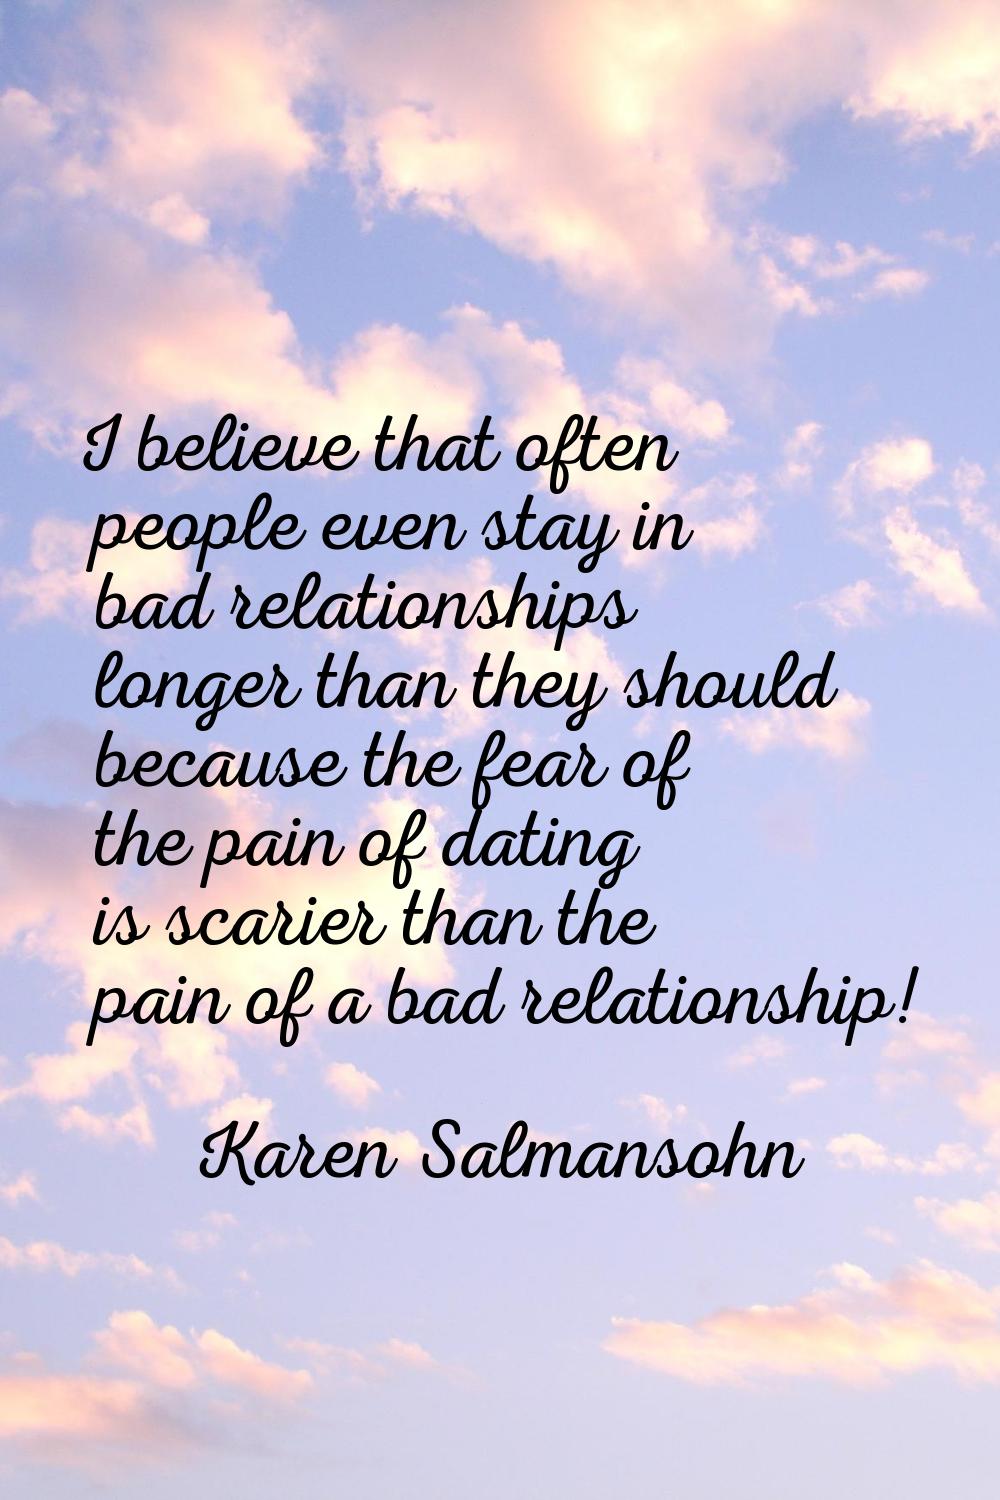 I believe that often people even stay in bad relationships longer than they should because the fear